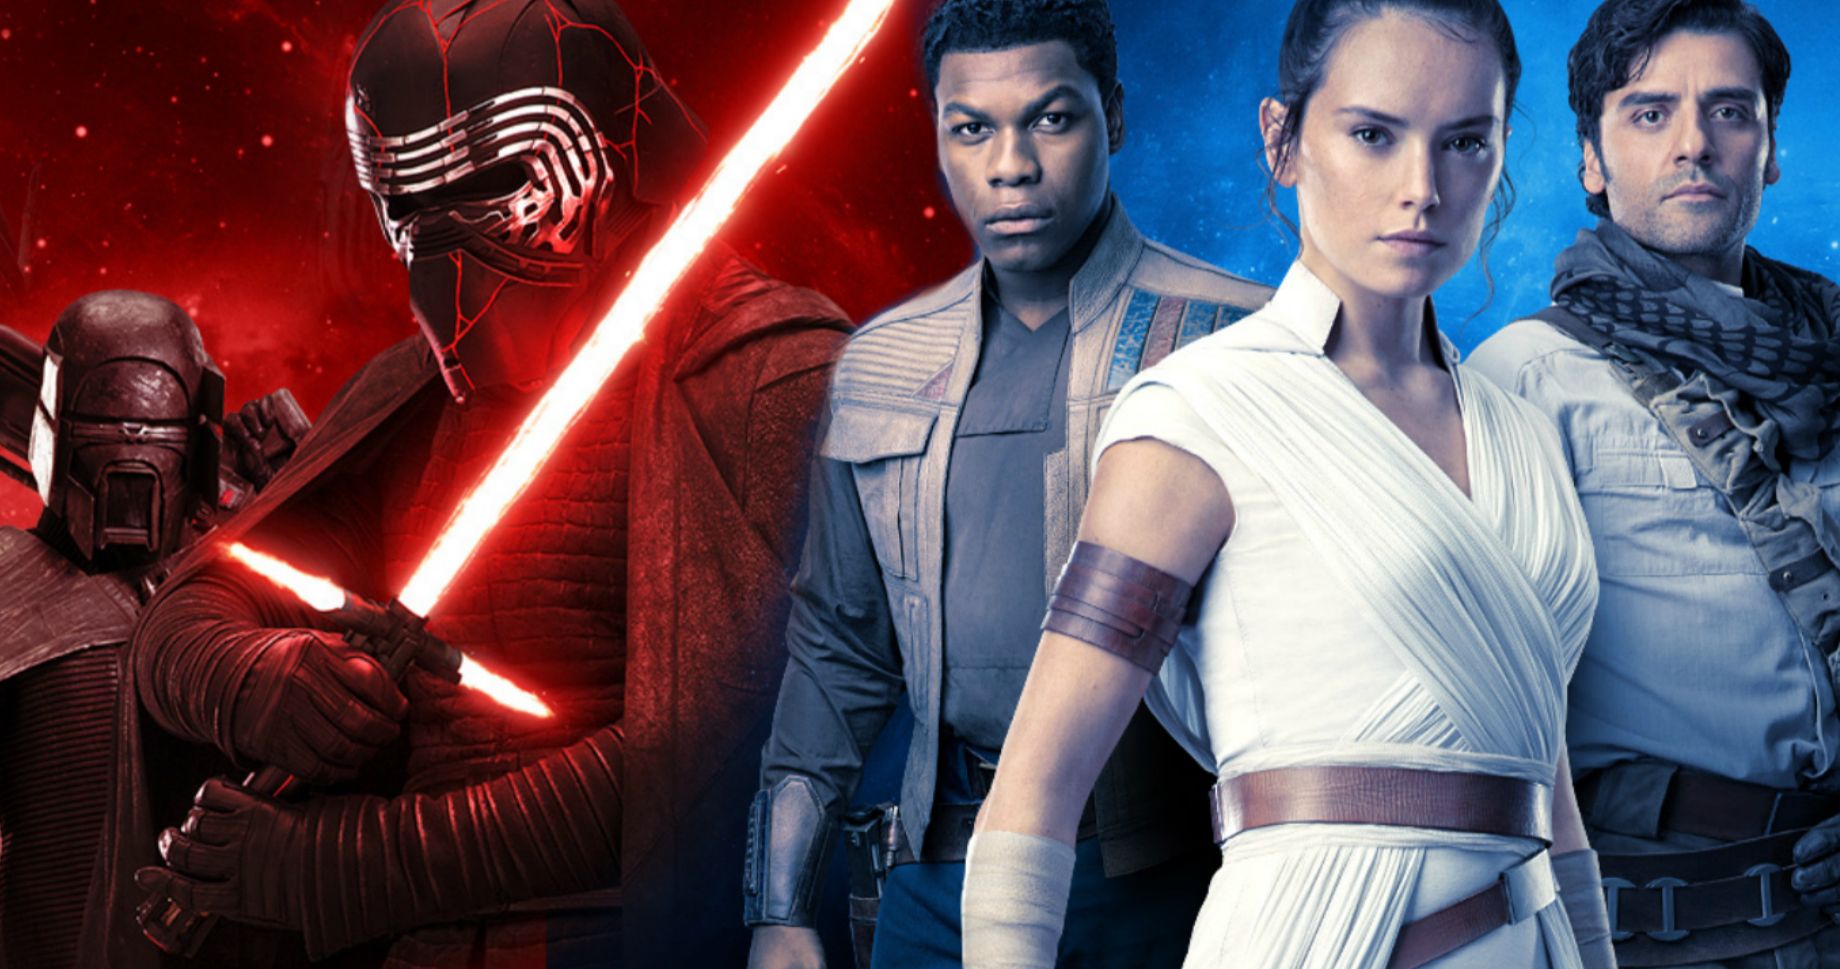 Final Rise of Skywalker Trailer Arrives Monday, Tickets Will Also Go on Sale